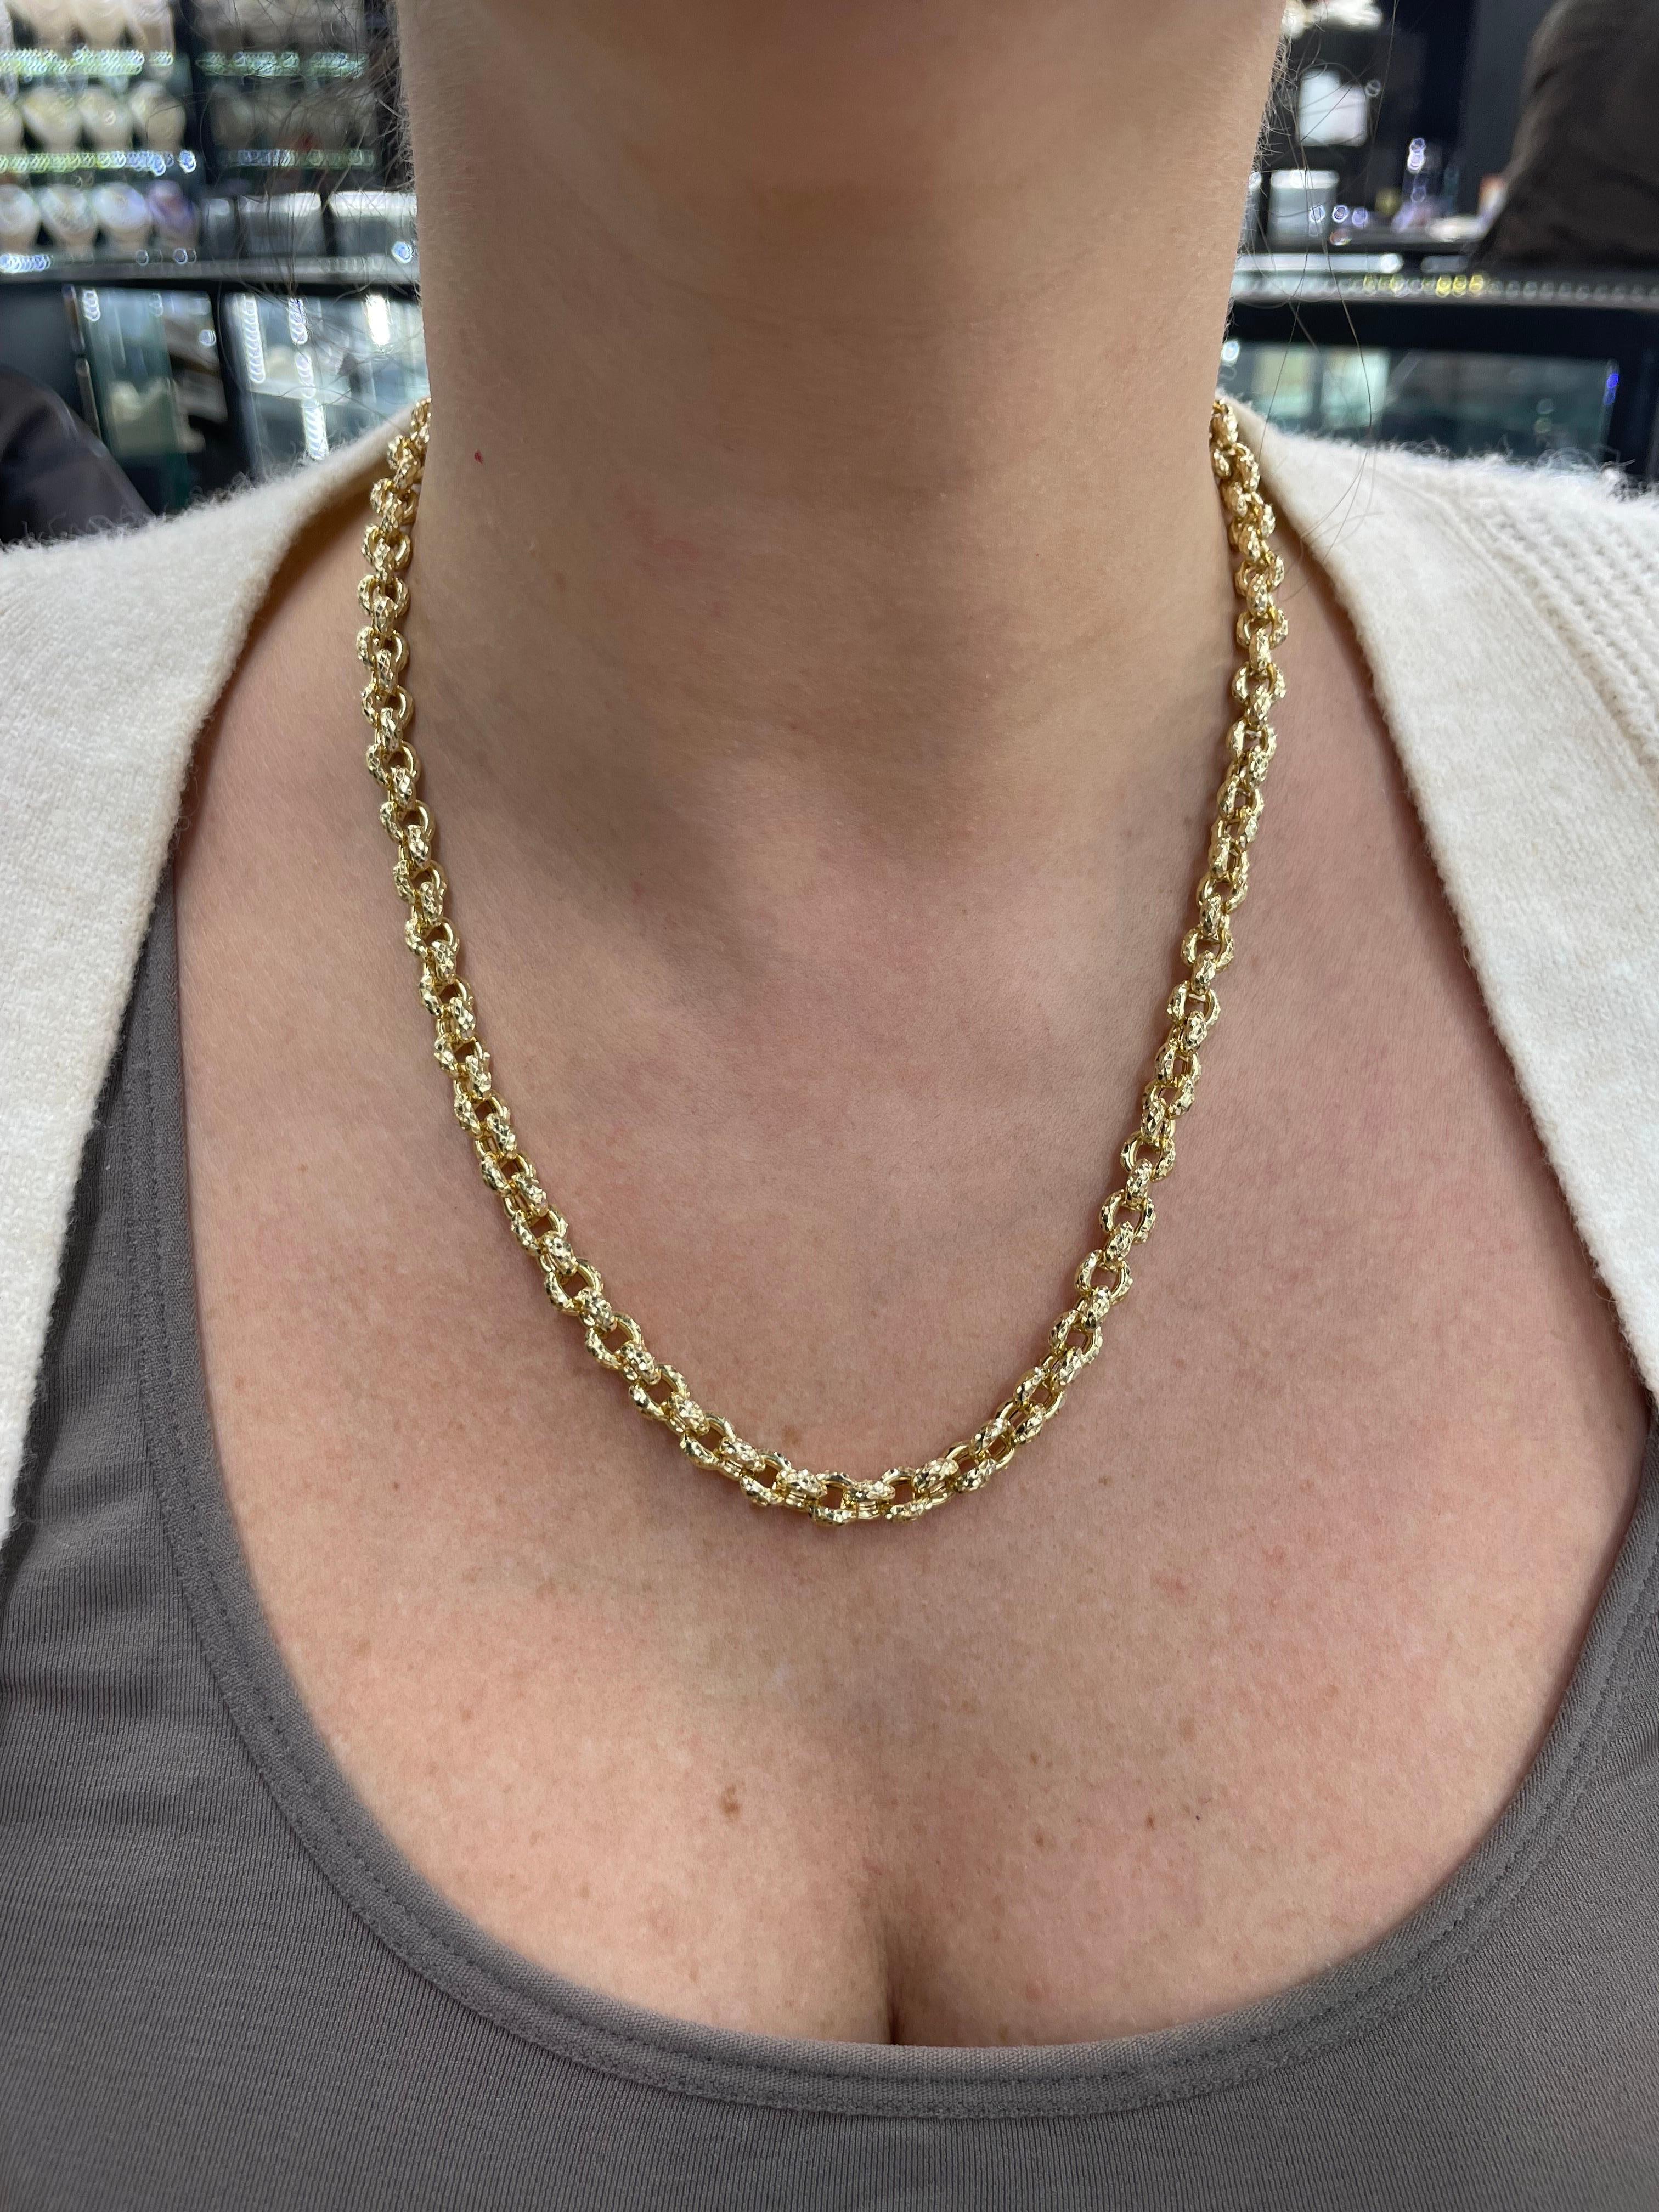 14 Karat Yellow gold hammered link necklace weighing 31.24 grams, 20 inches long.
Match bracelet.
Necklace can be made longer.
DM for pricing. 